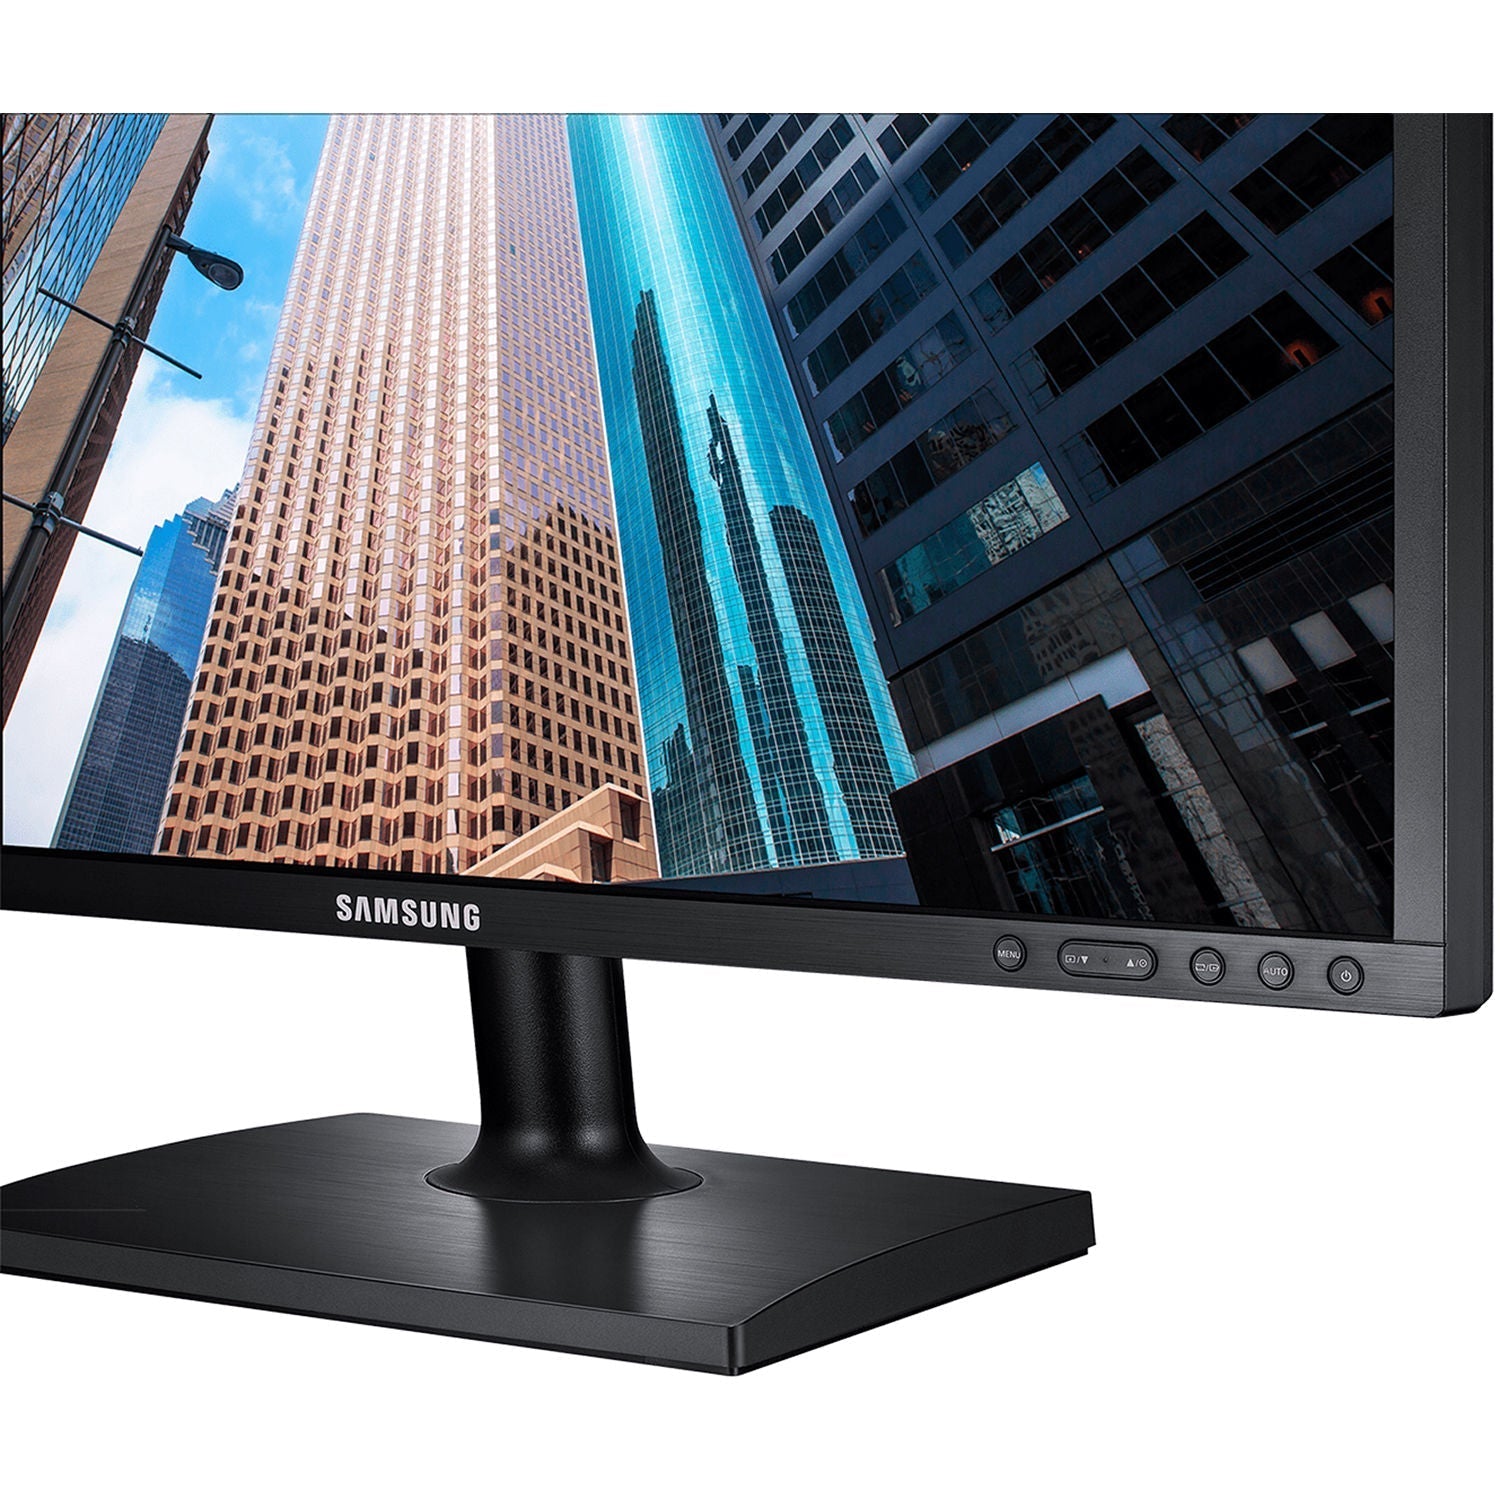 Samsung LS22E20KBSV/GO 22" 1920 x 1080 60Hz FHD Monitor for Business - Certified Refurbished